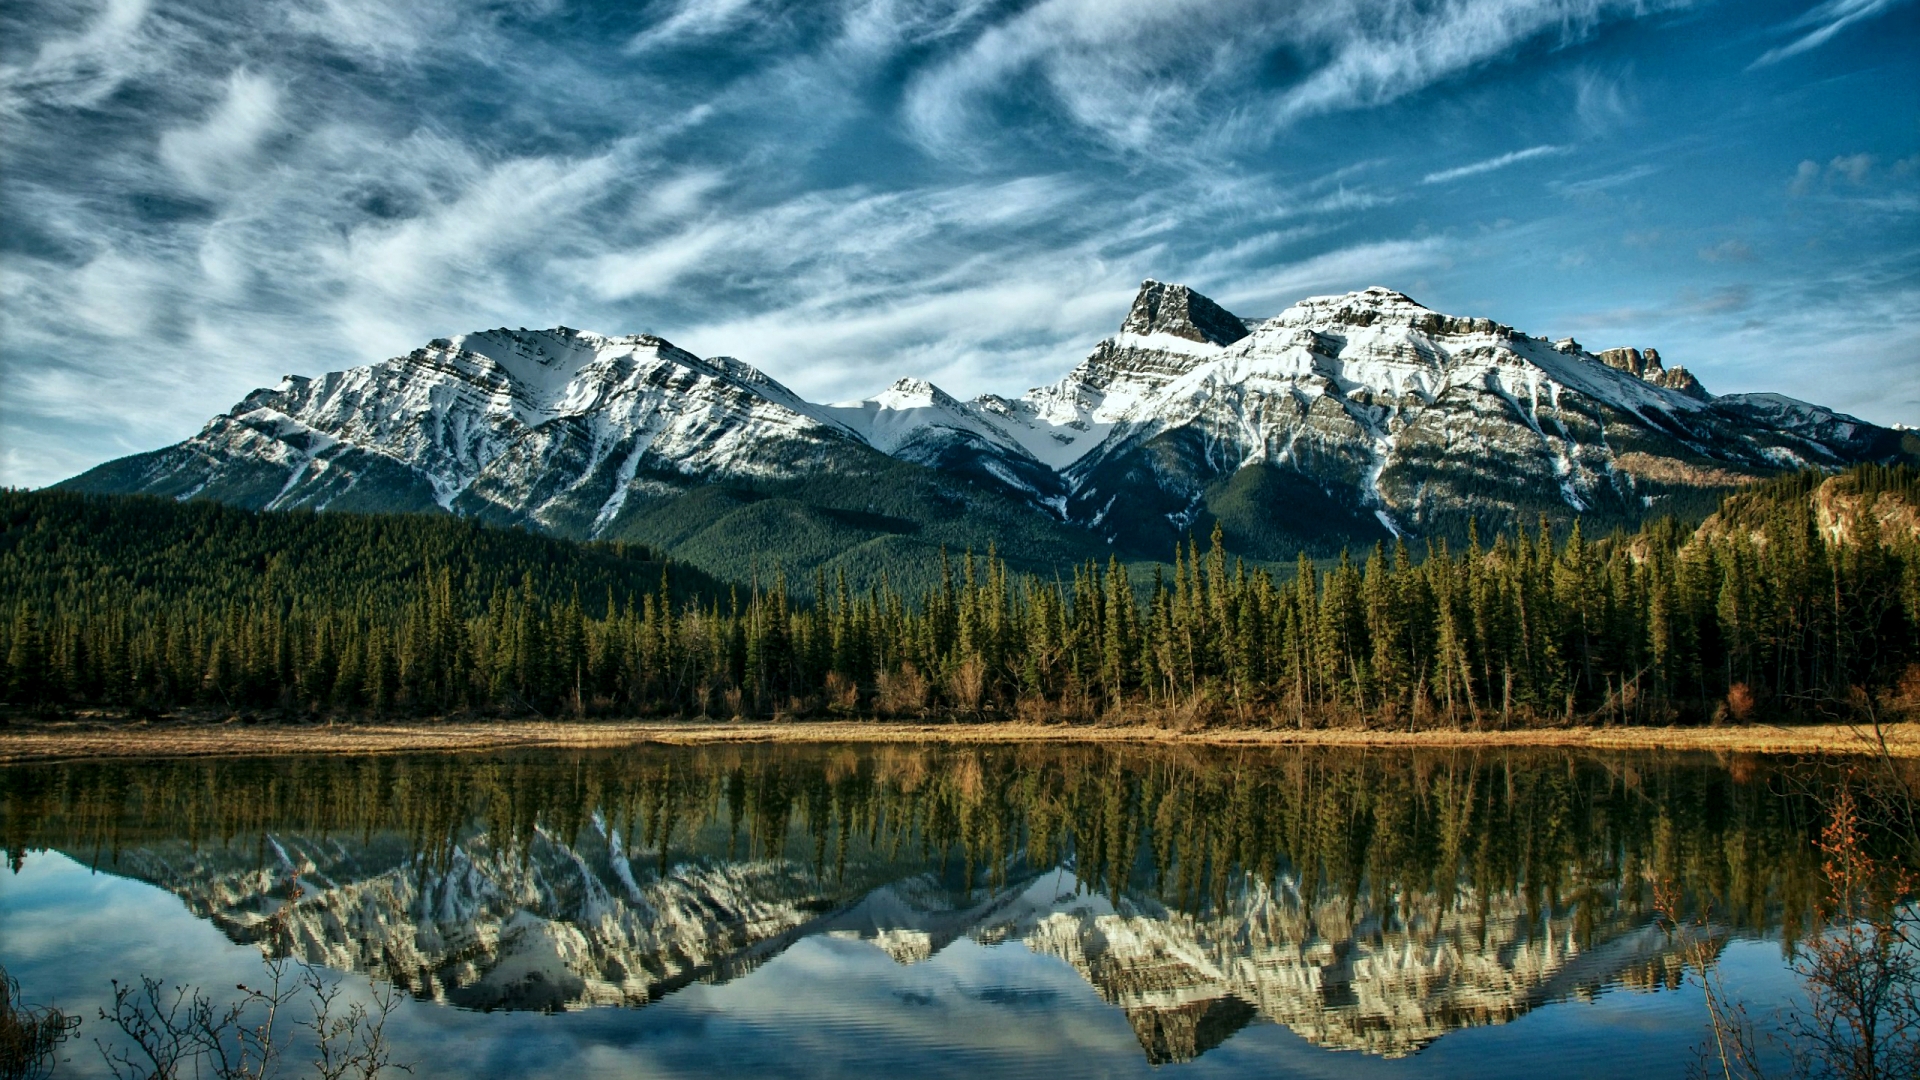 Alberta Mountains Canada for 1920 x 1080 HDTV 1080p resolution